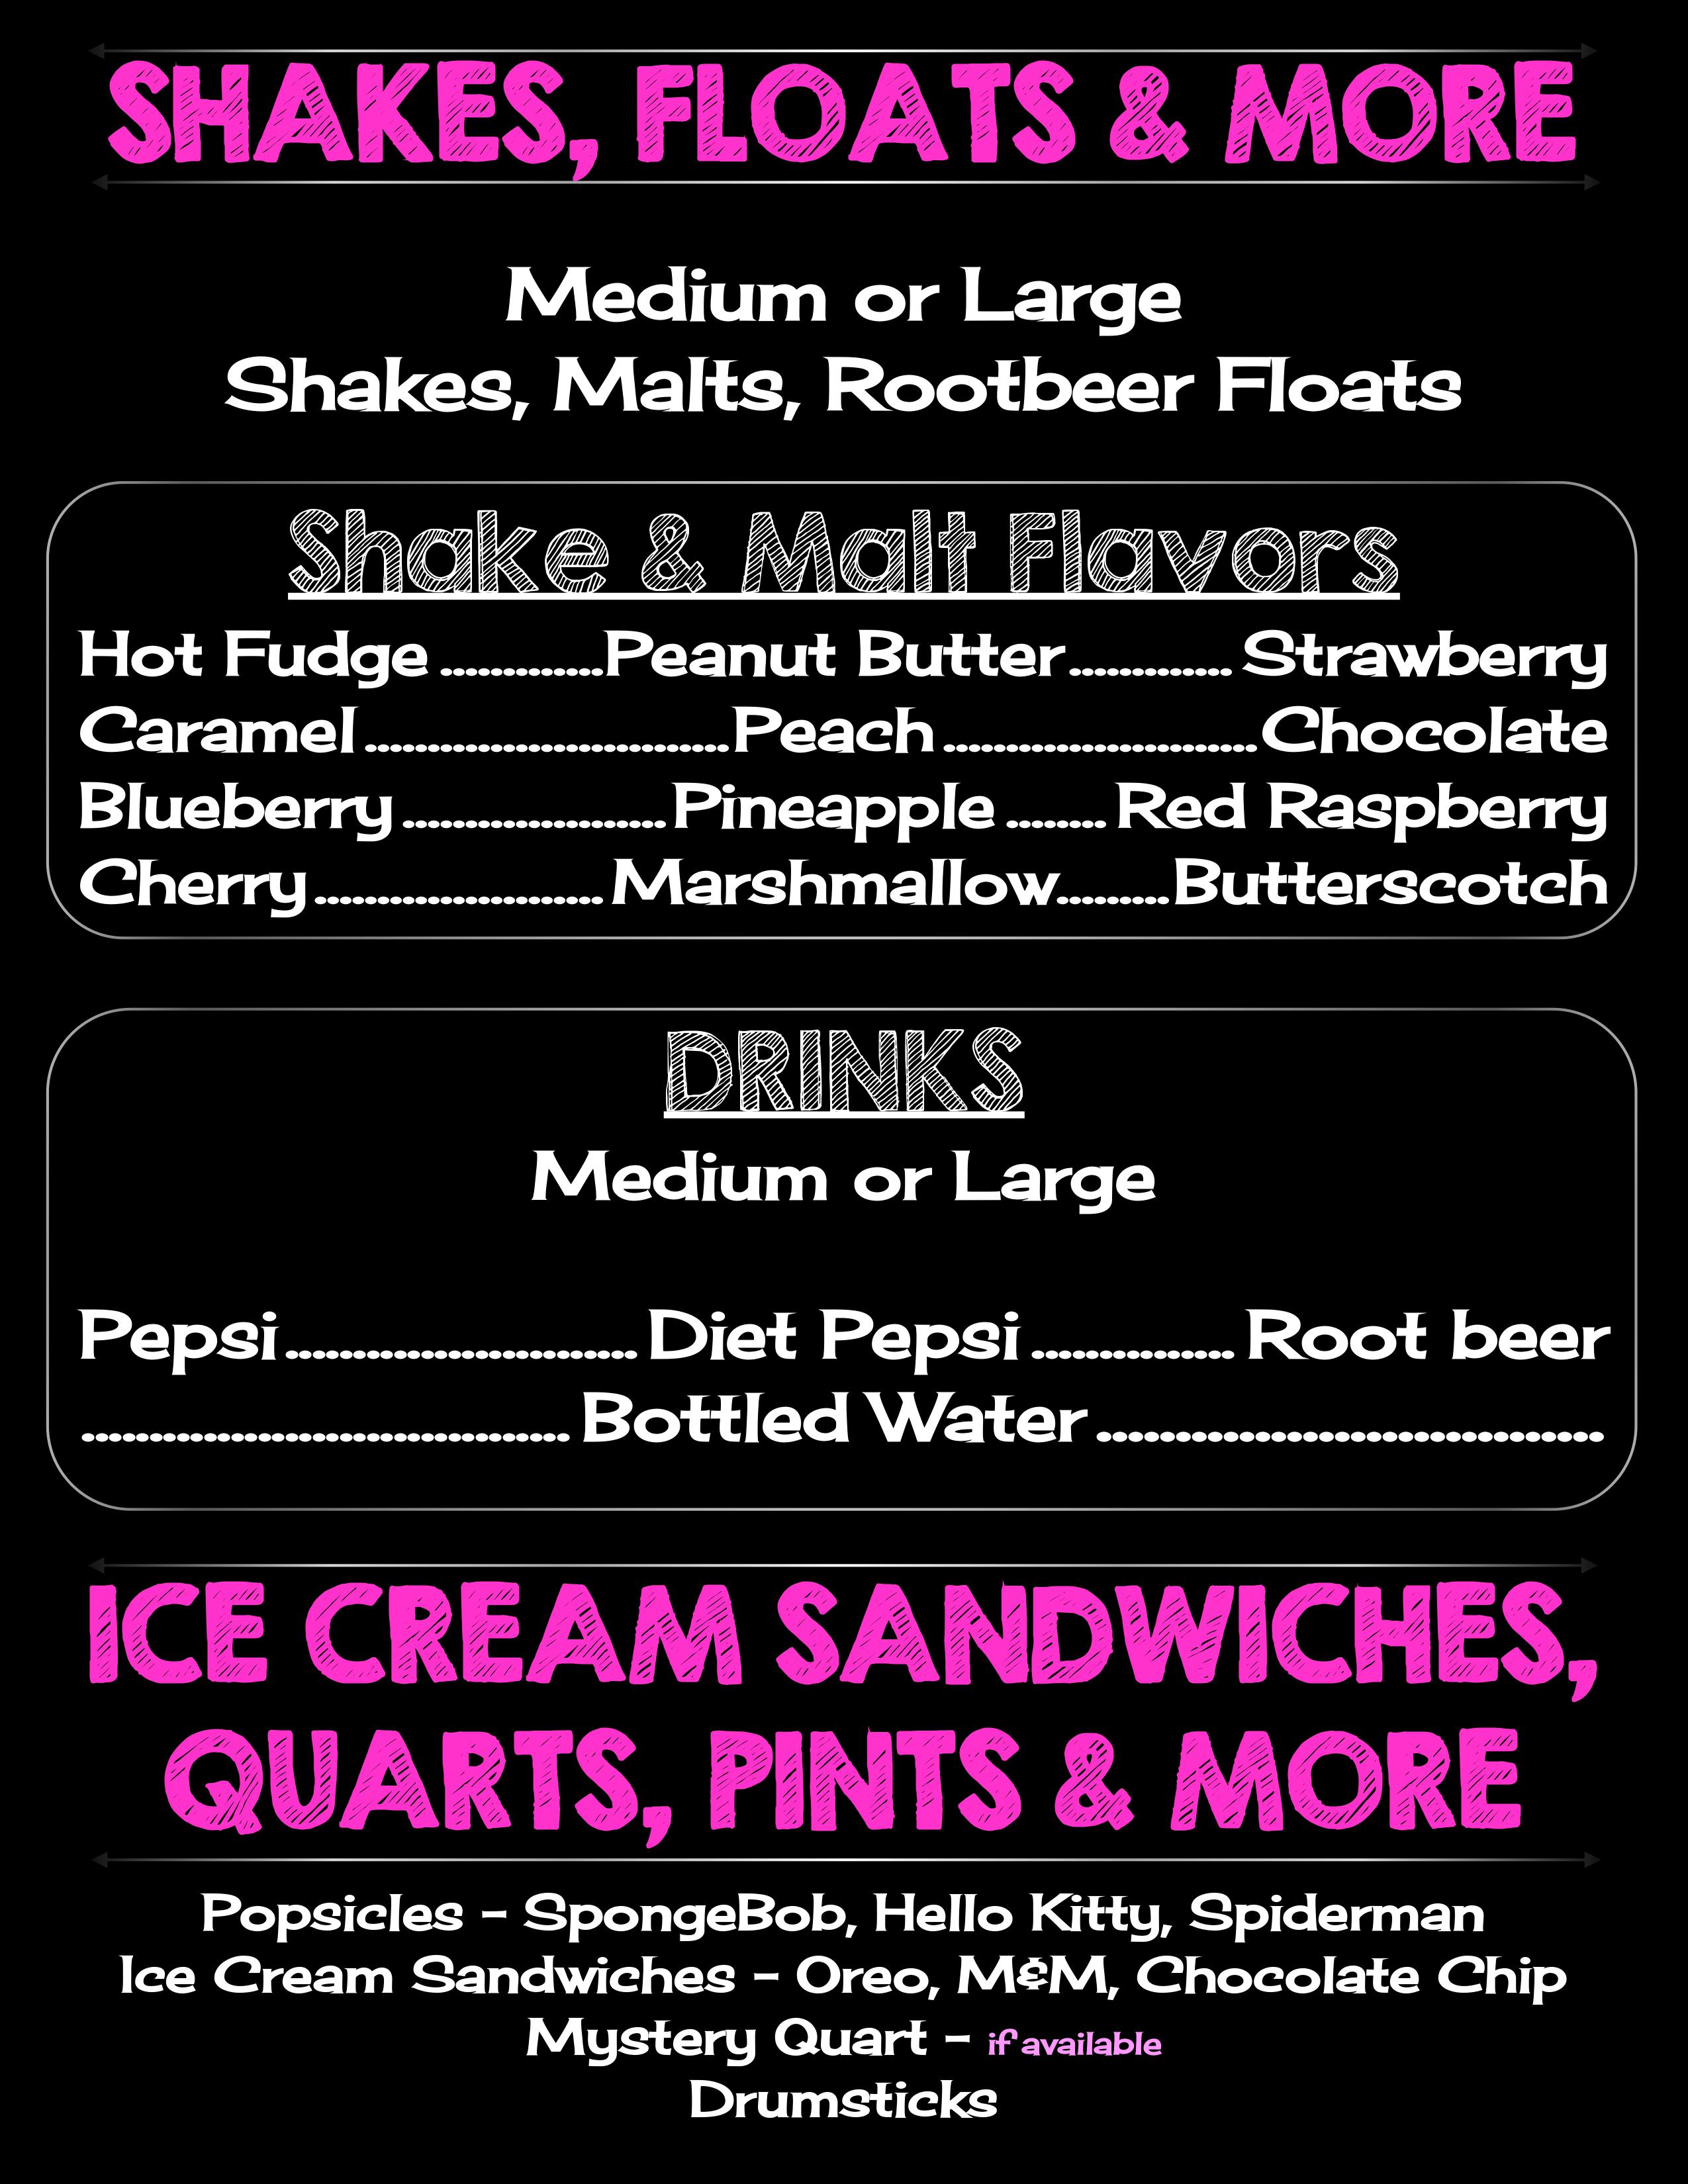 Shakes, Floats & More